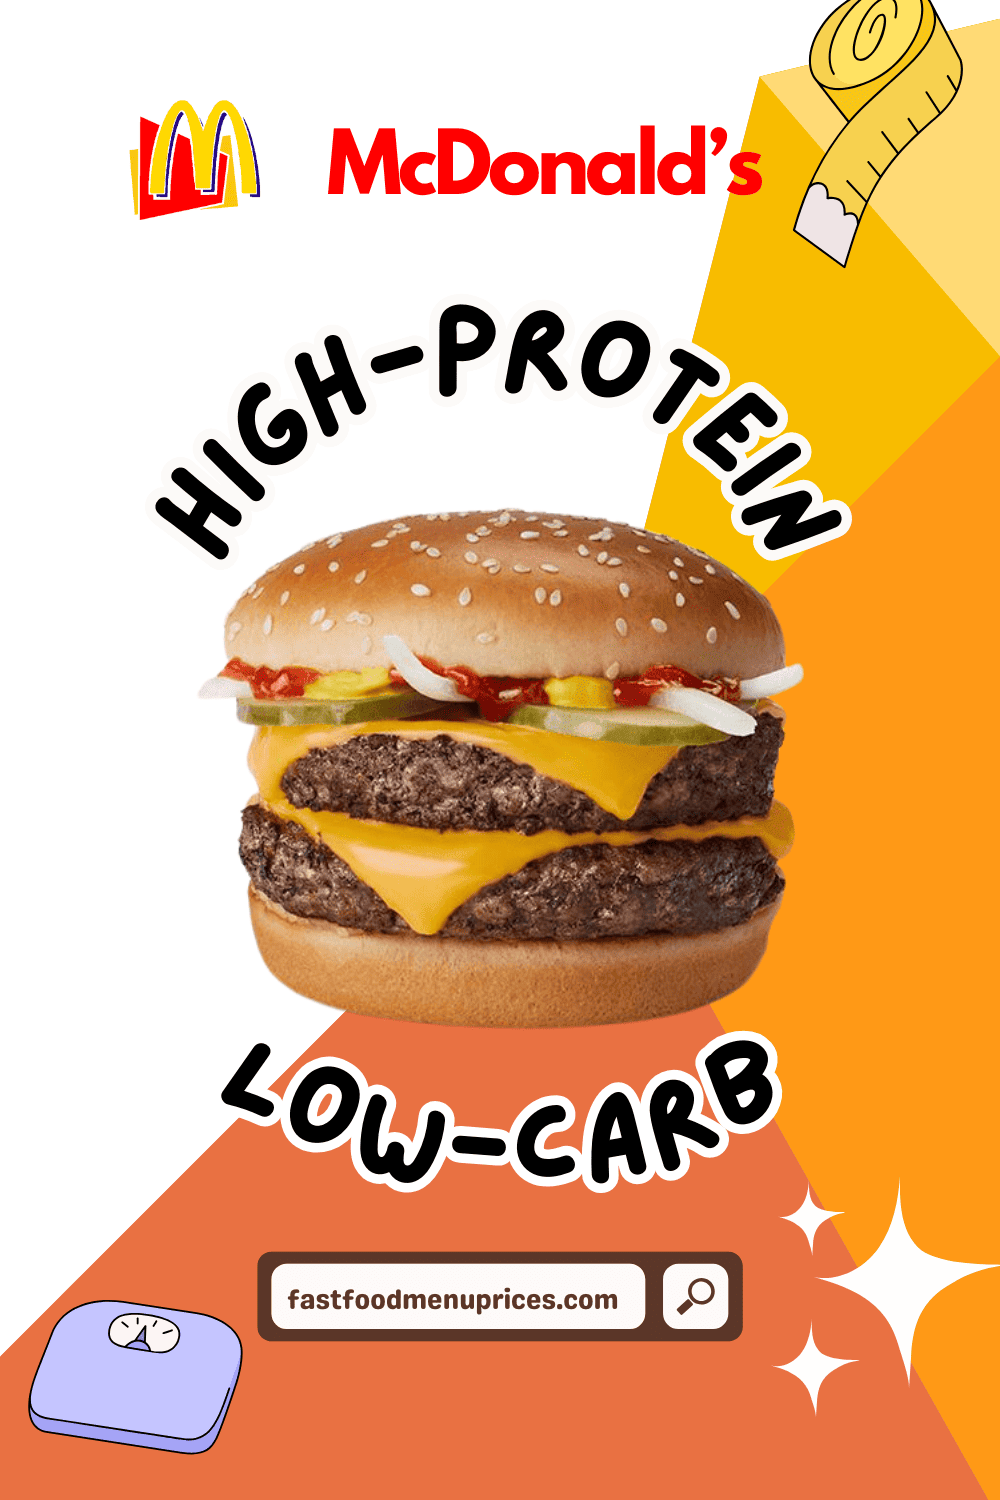 McDonald's high protein low carb options now include items from the secret menu.